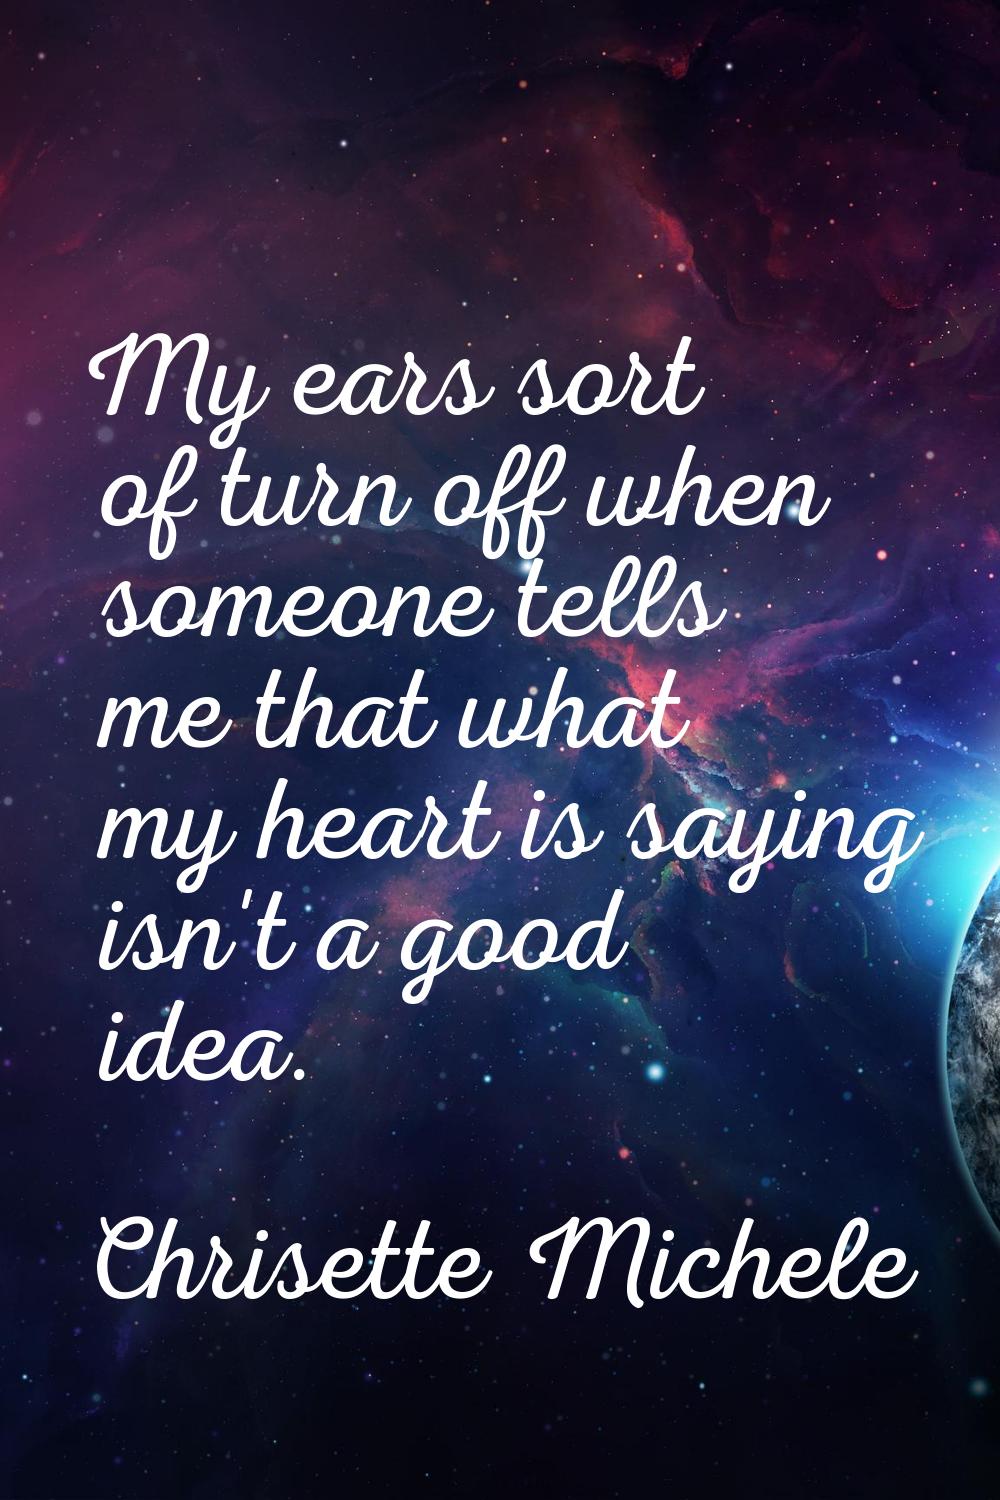 My ears sort of turn off when someone tells me that what my heart is saying isn't a good idea.